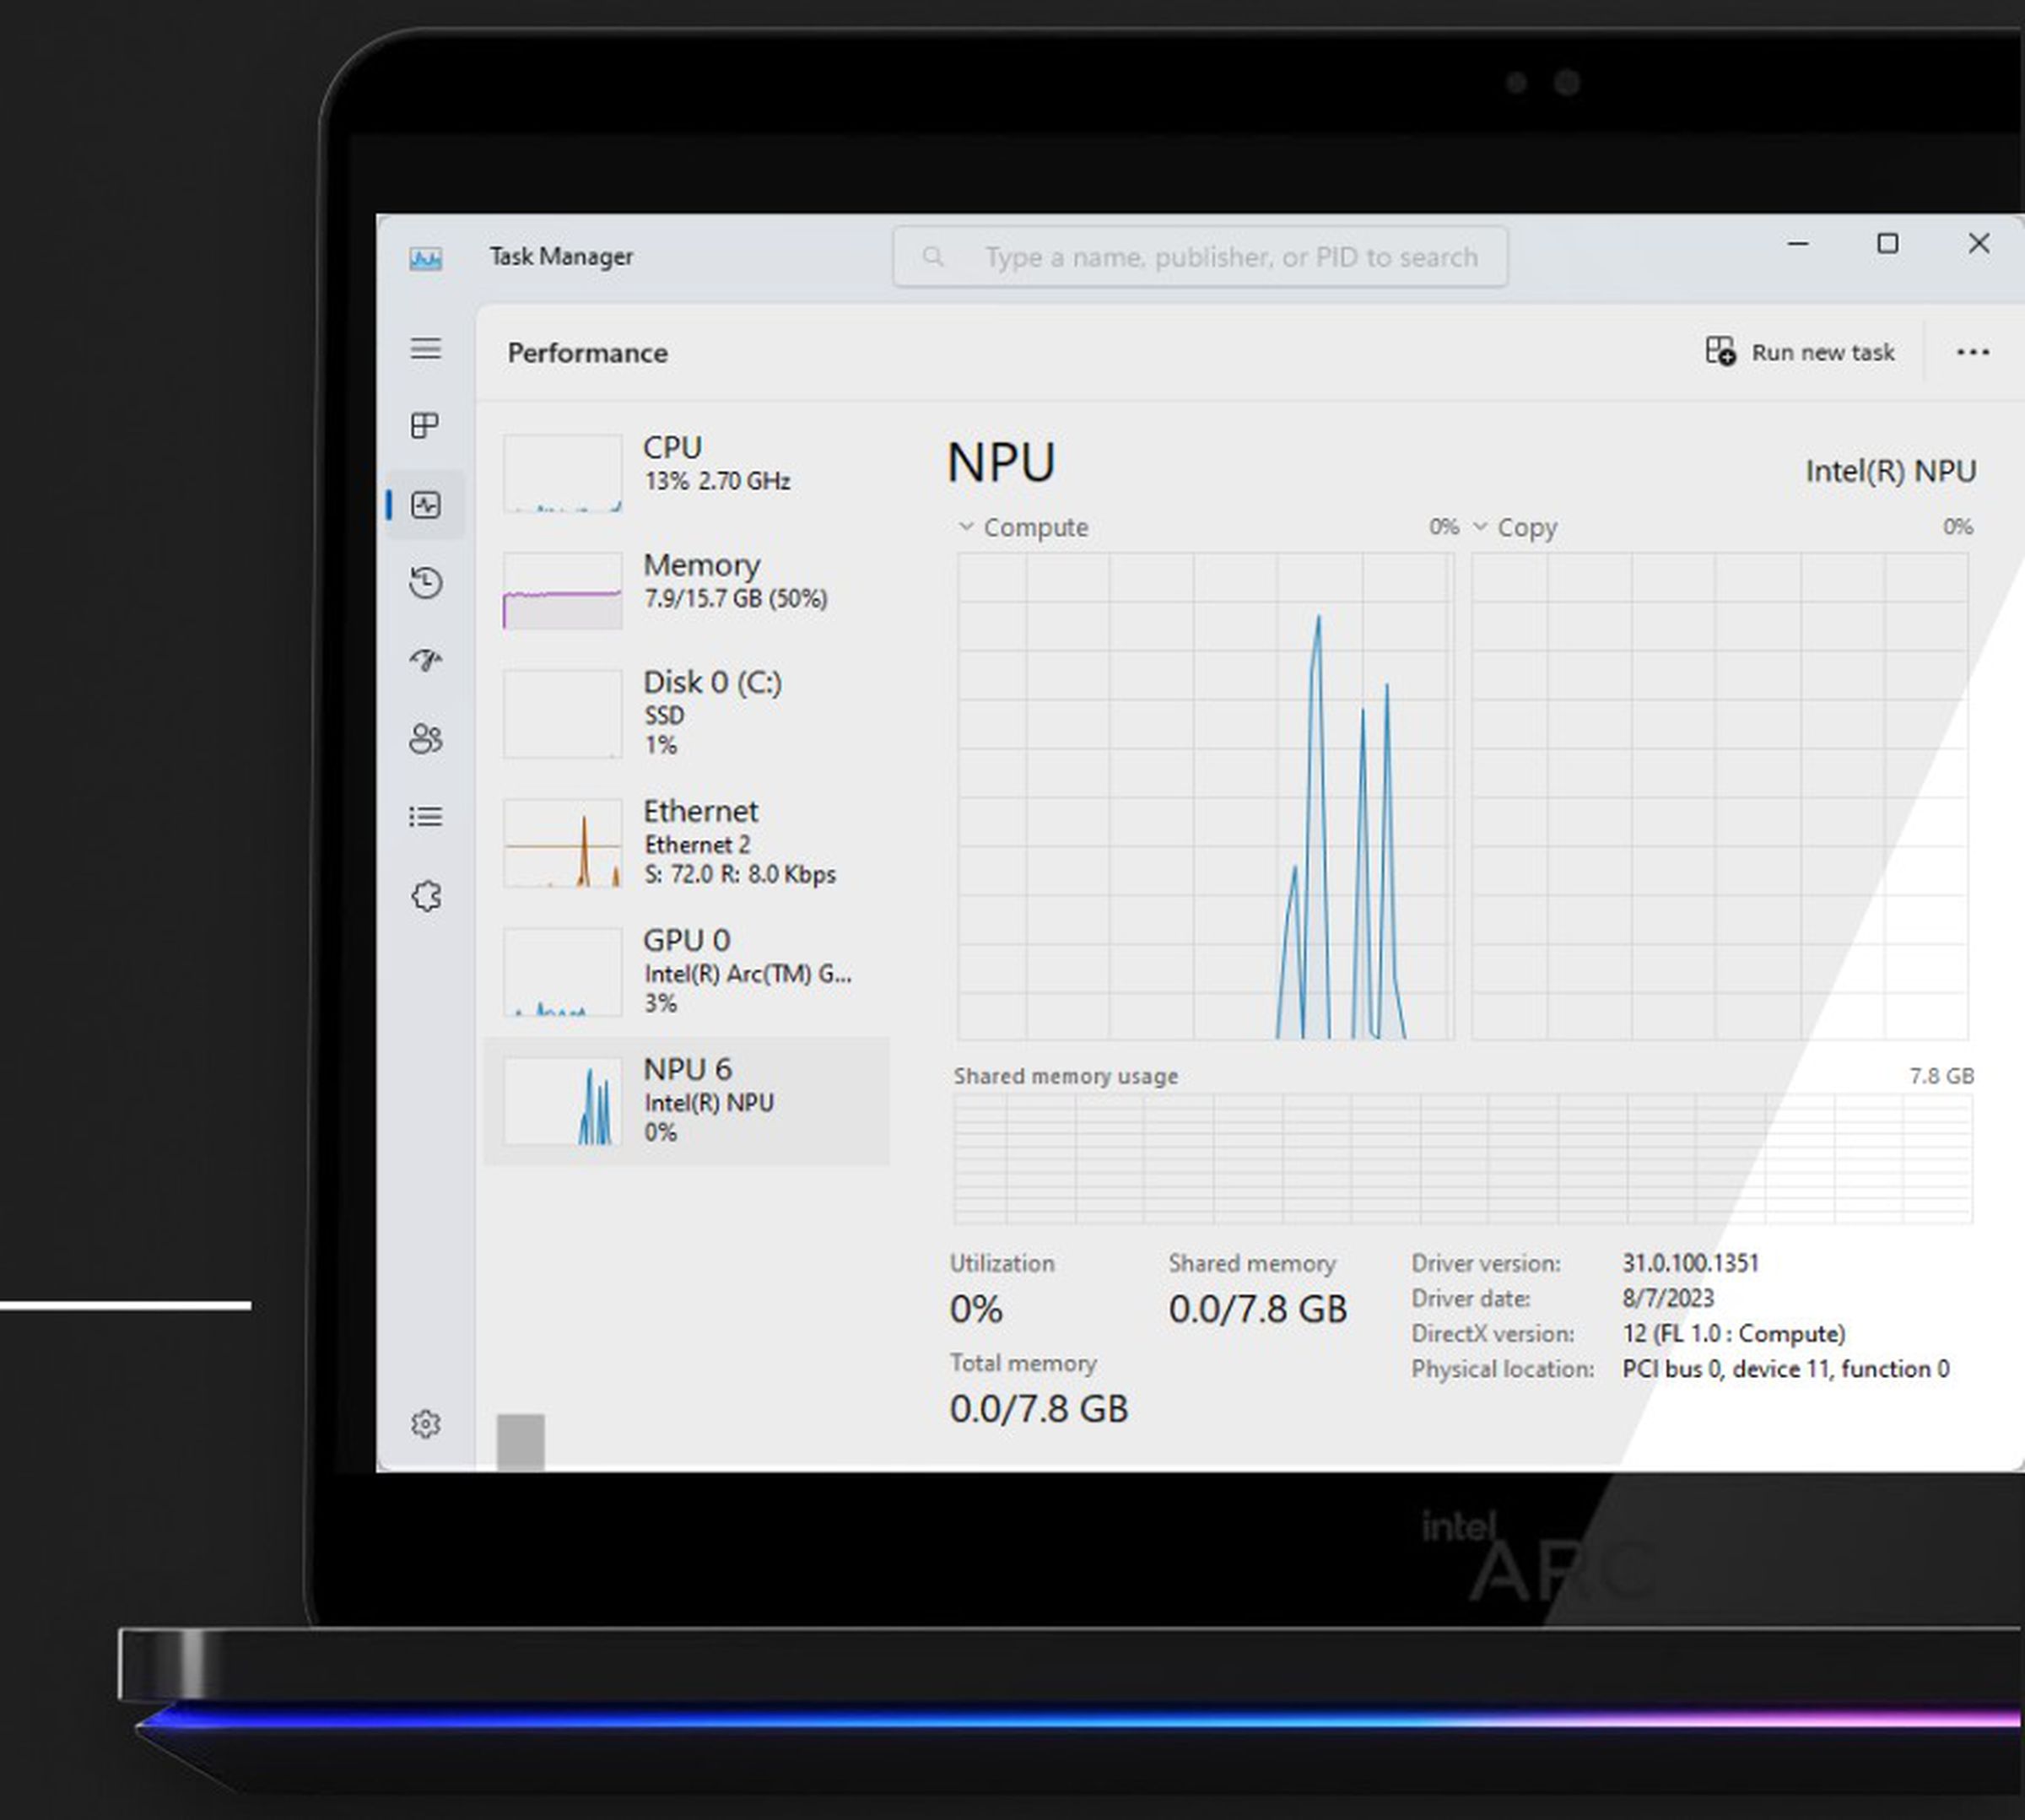 Intel’s NPU in Windows Task Manager.